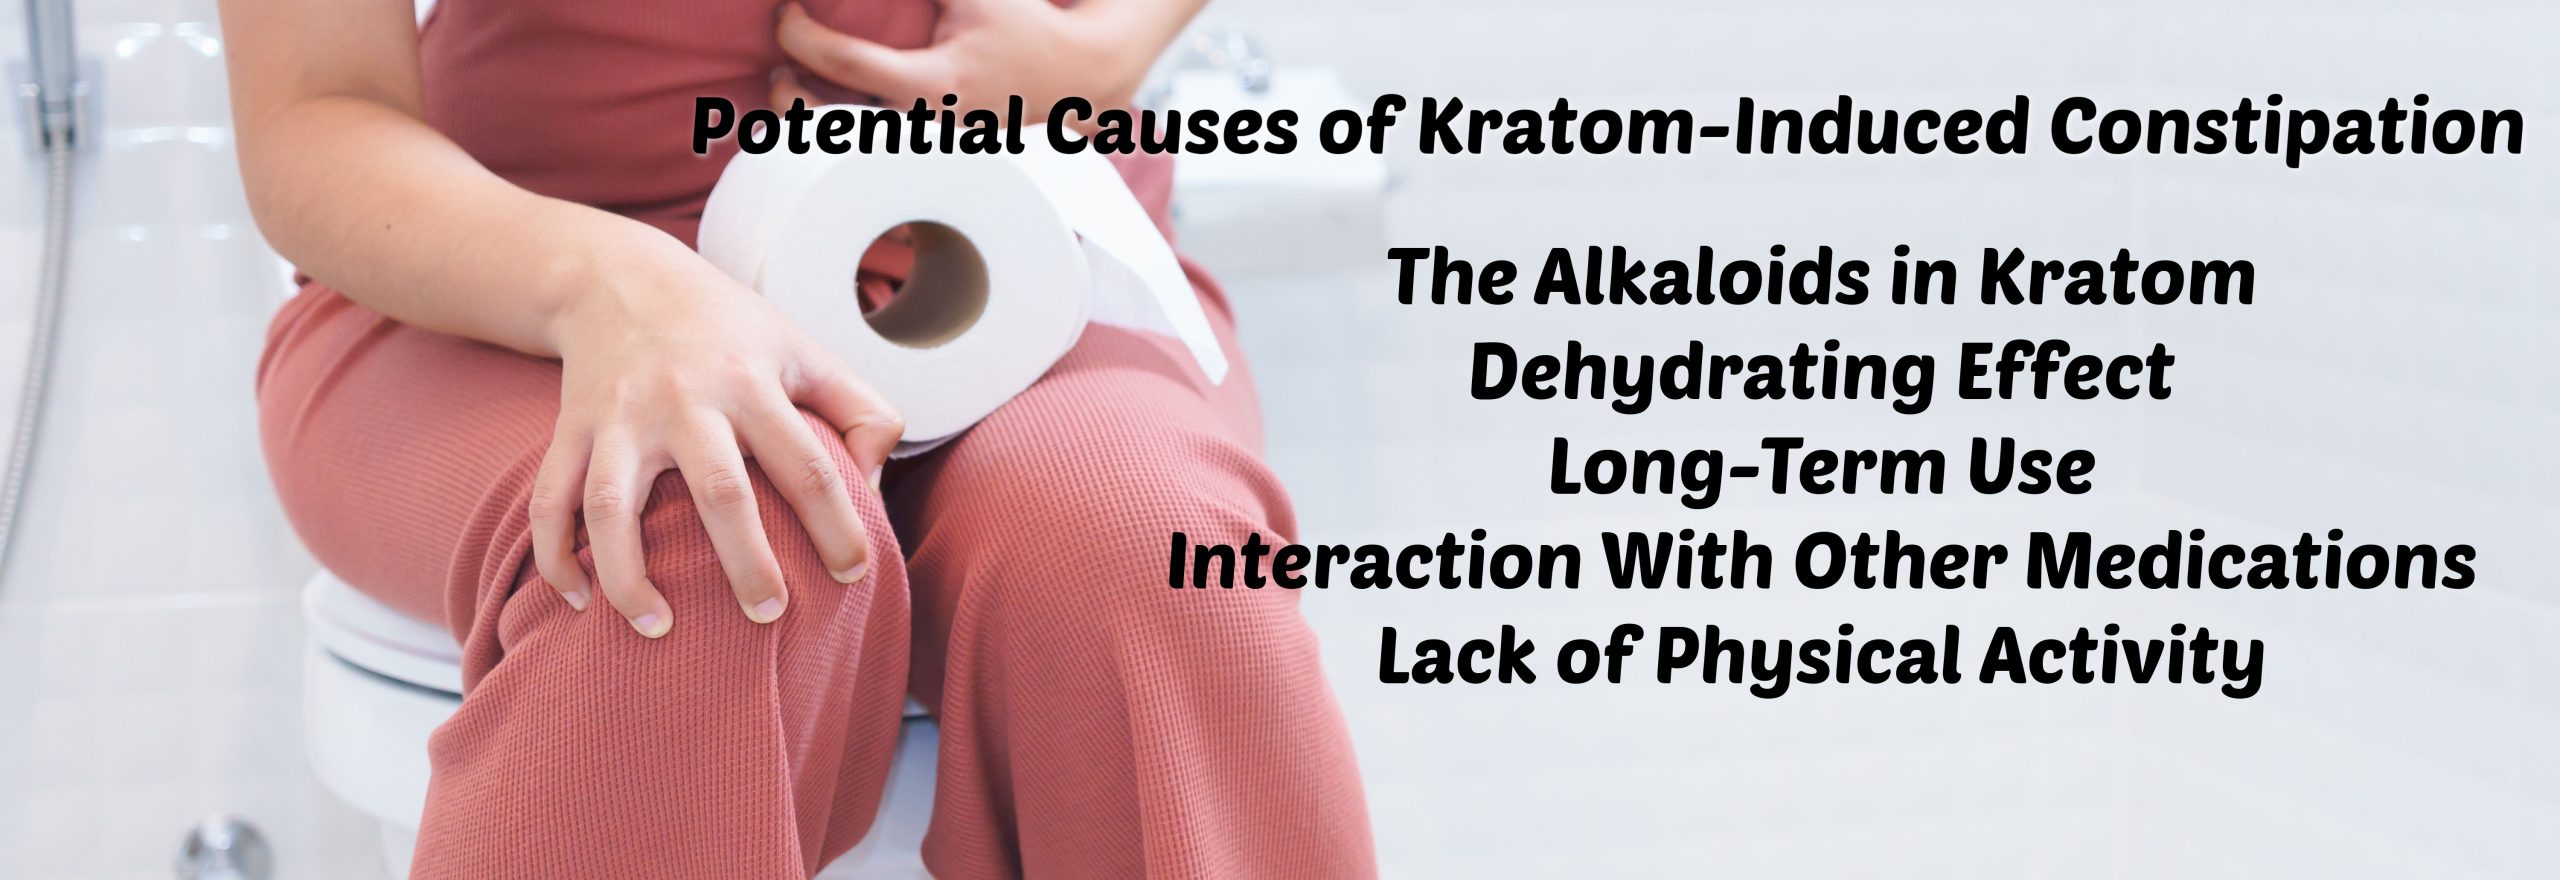 image of potential cause of kratom induced constipation